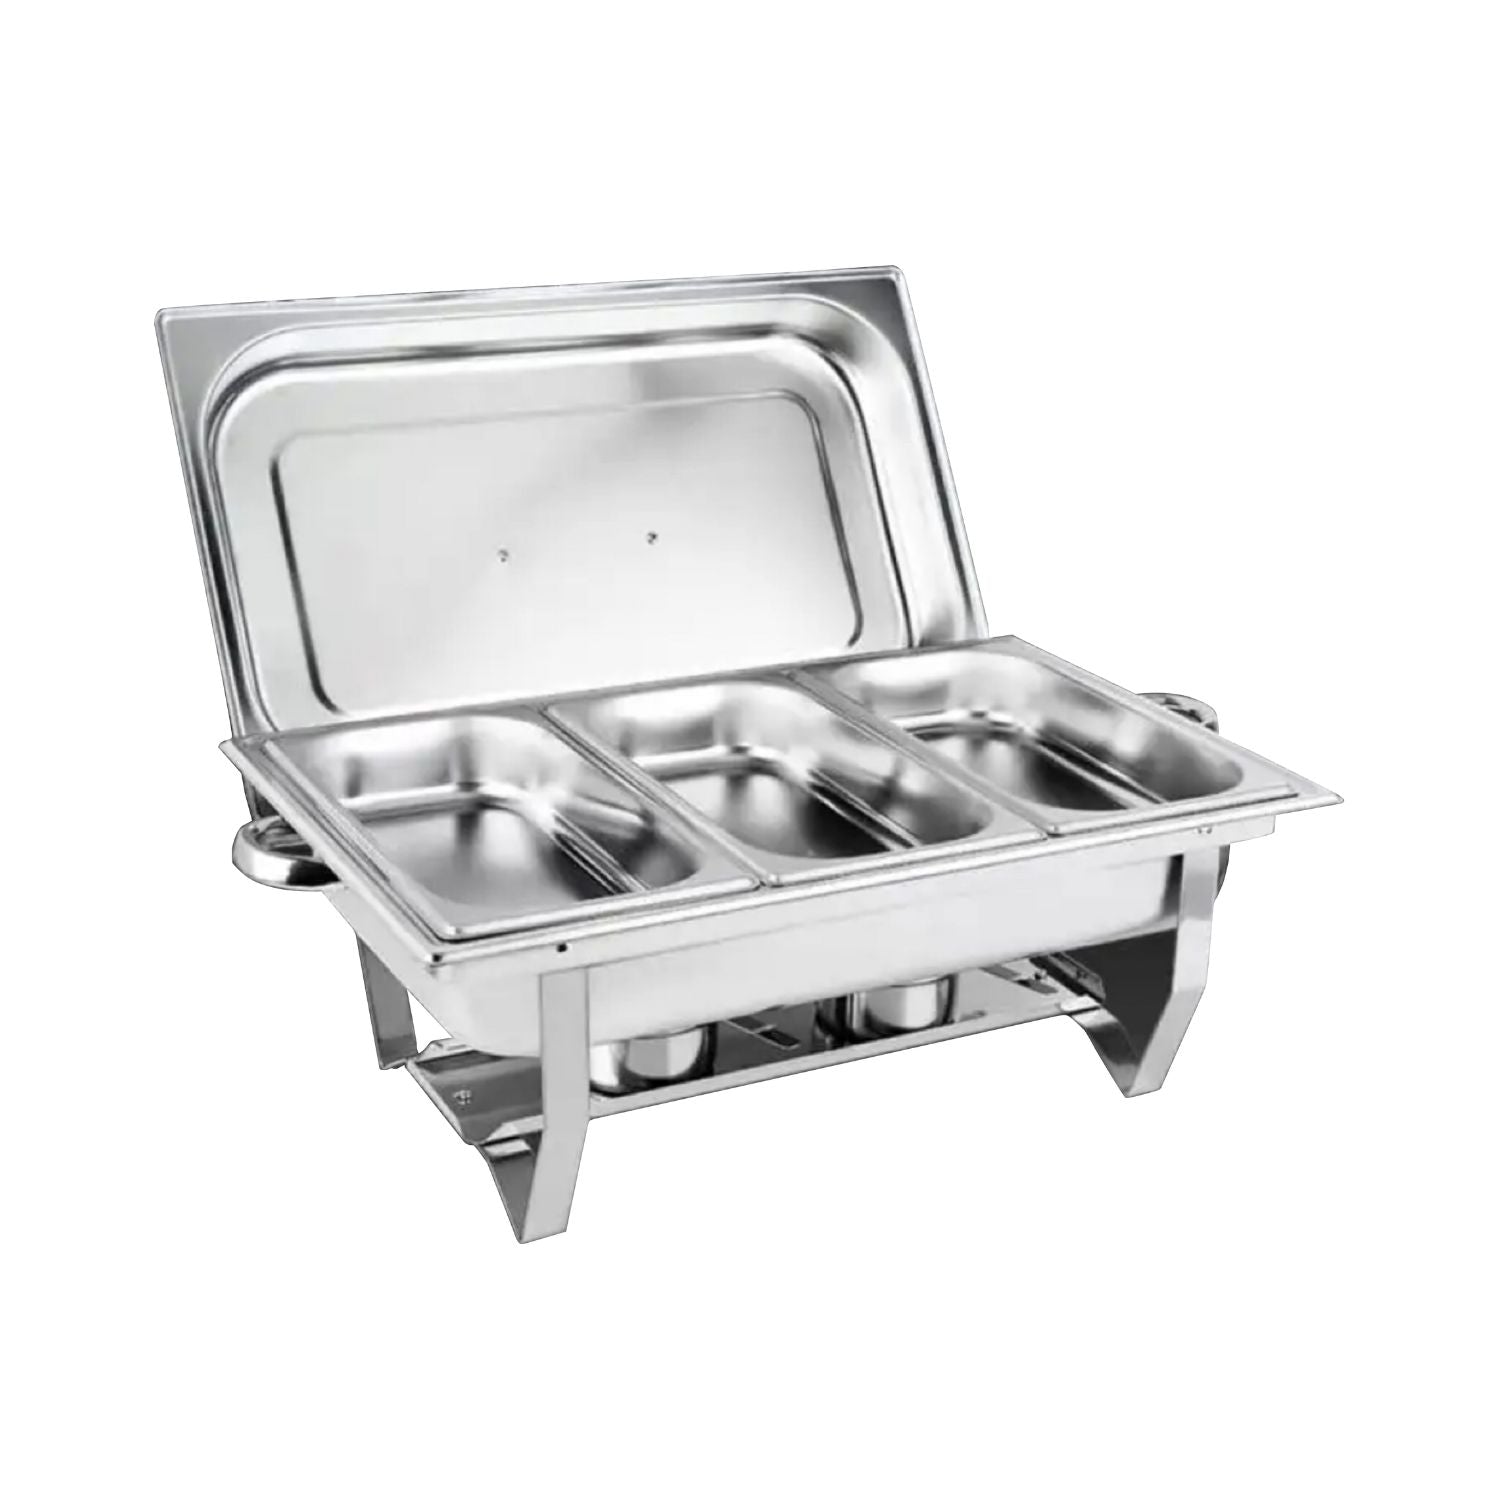 9L Chafing Dish Multifunctional Stainless Steel Food Buffet Warmer Pan (3x3L Triple Trays)